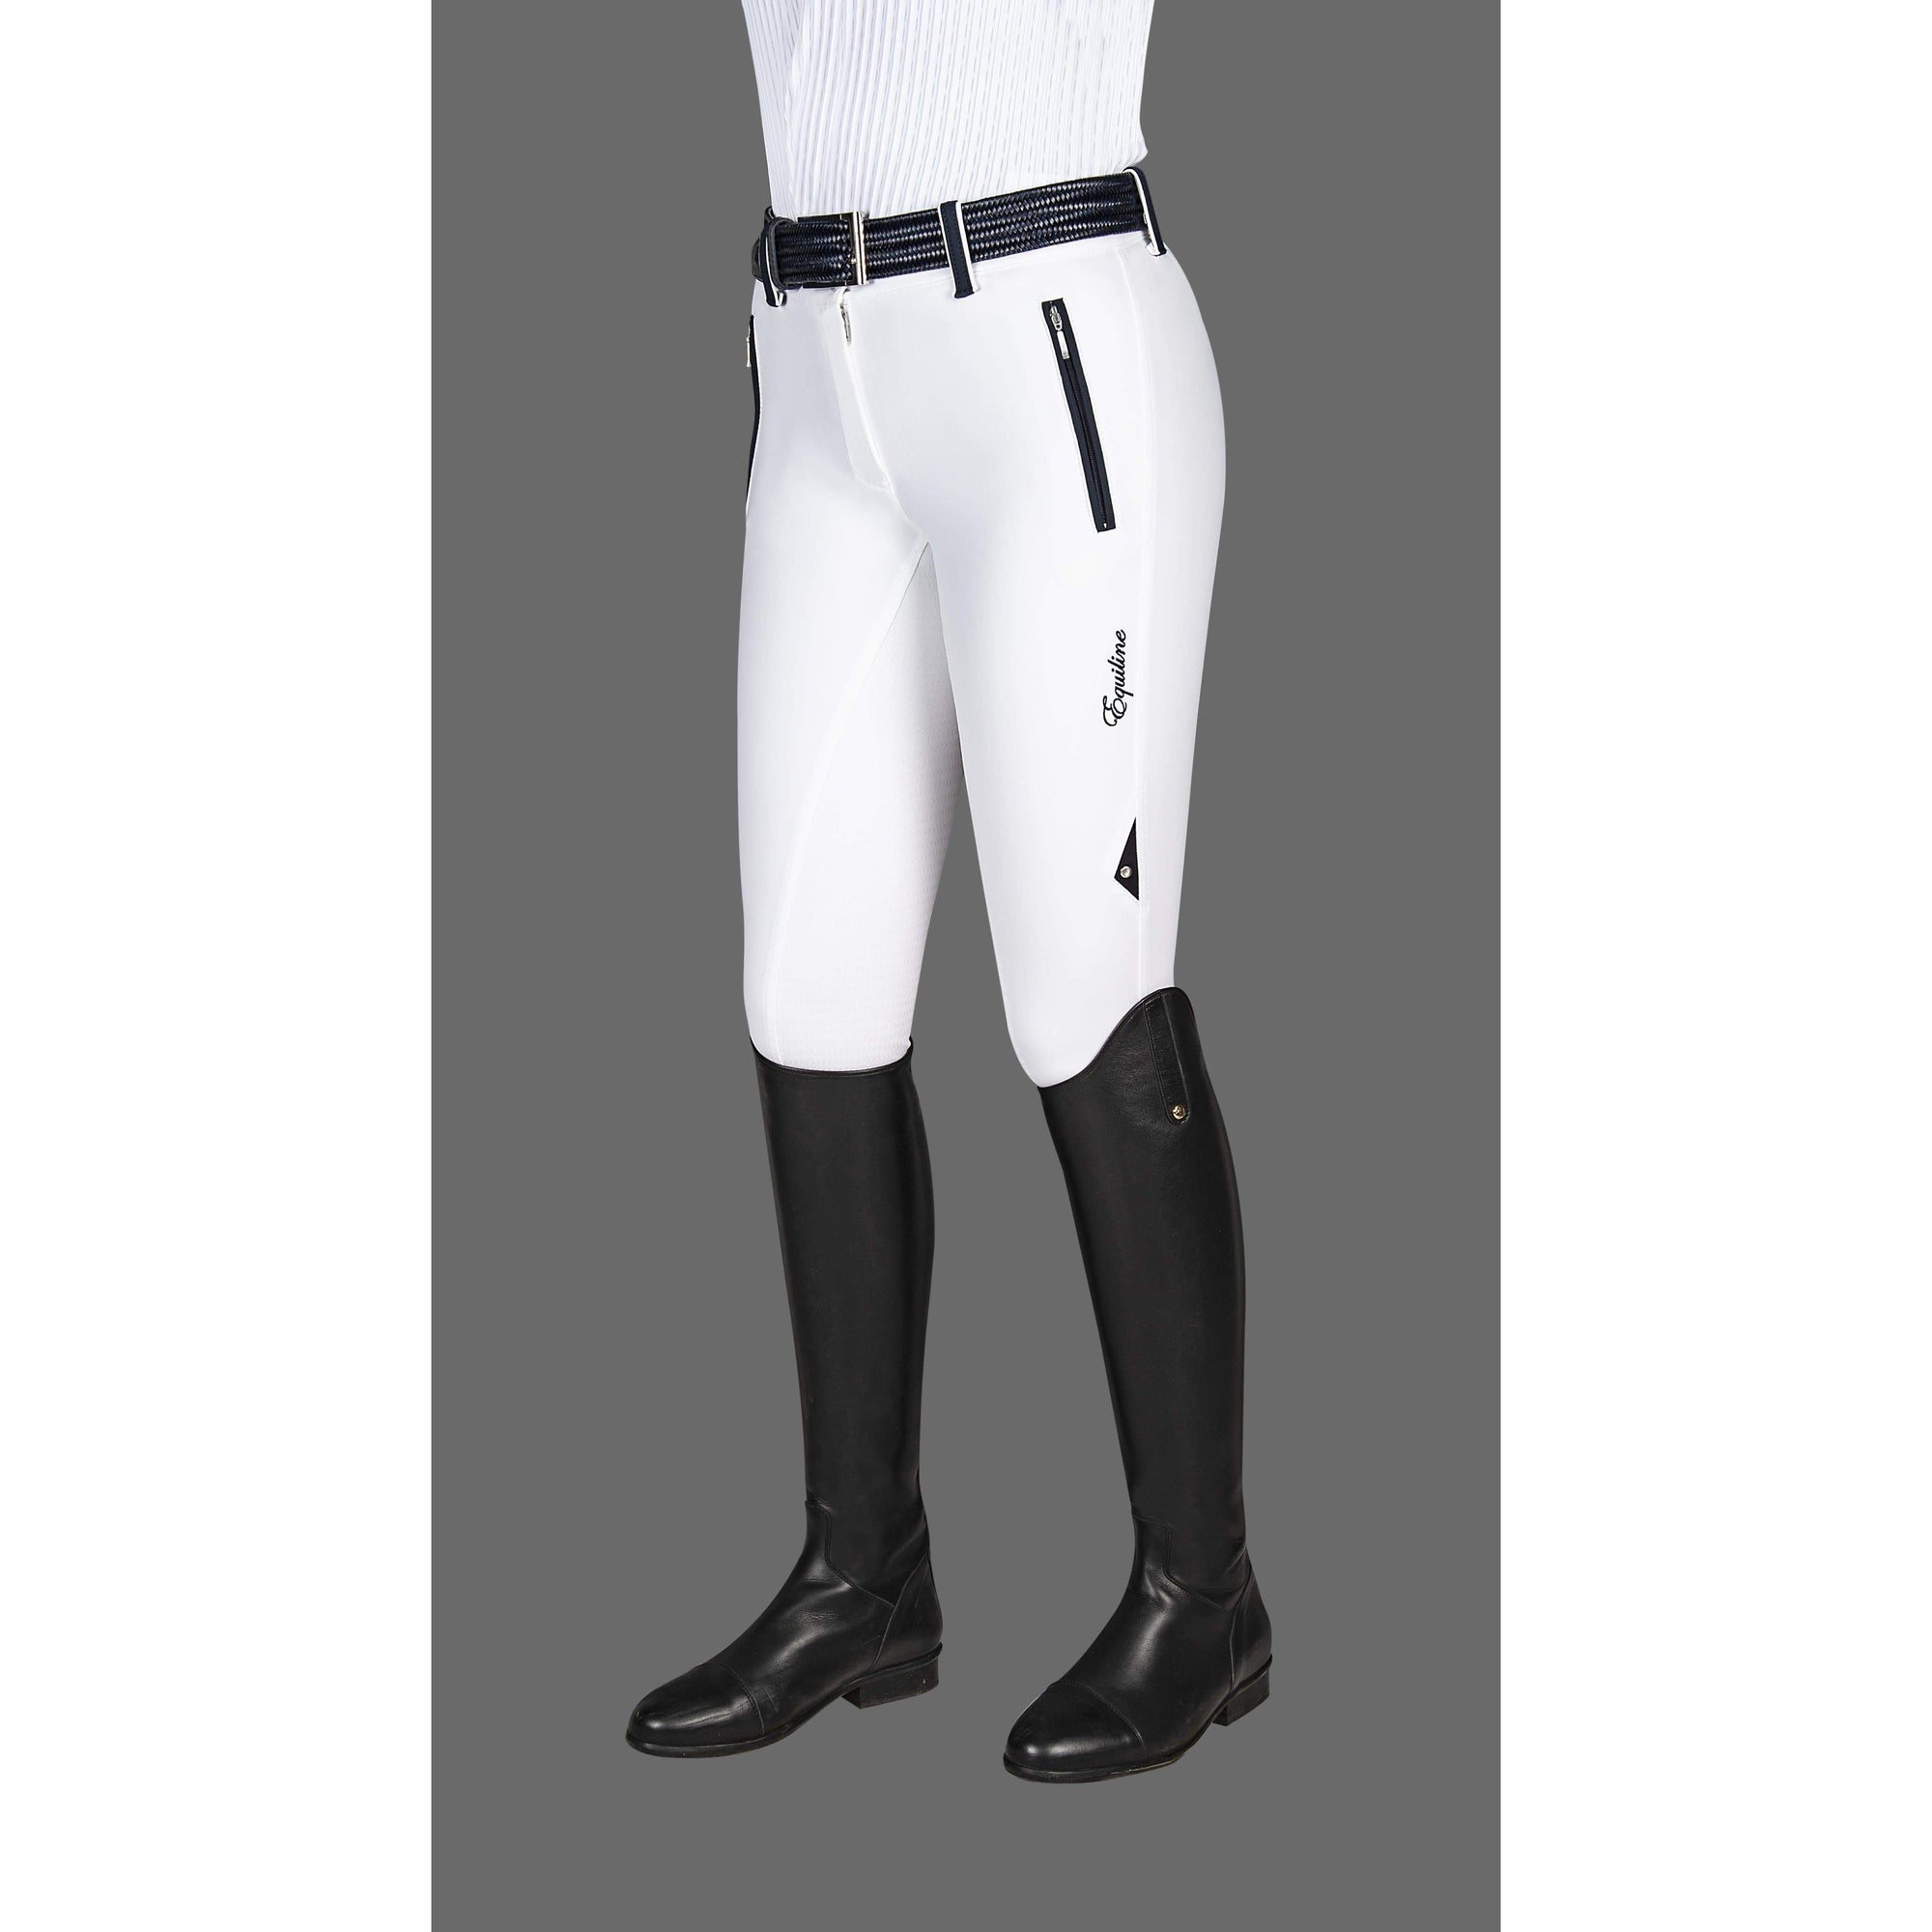 Equiline Angy Ladies Full Seat Breeches